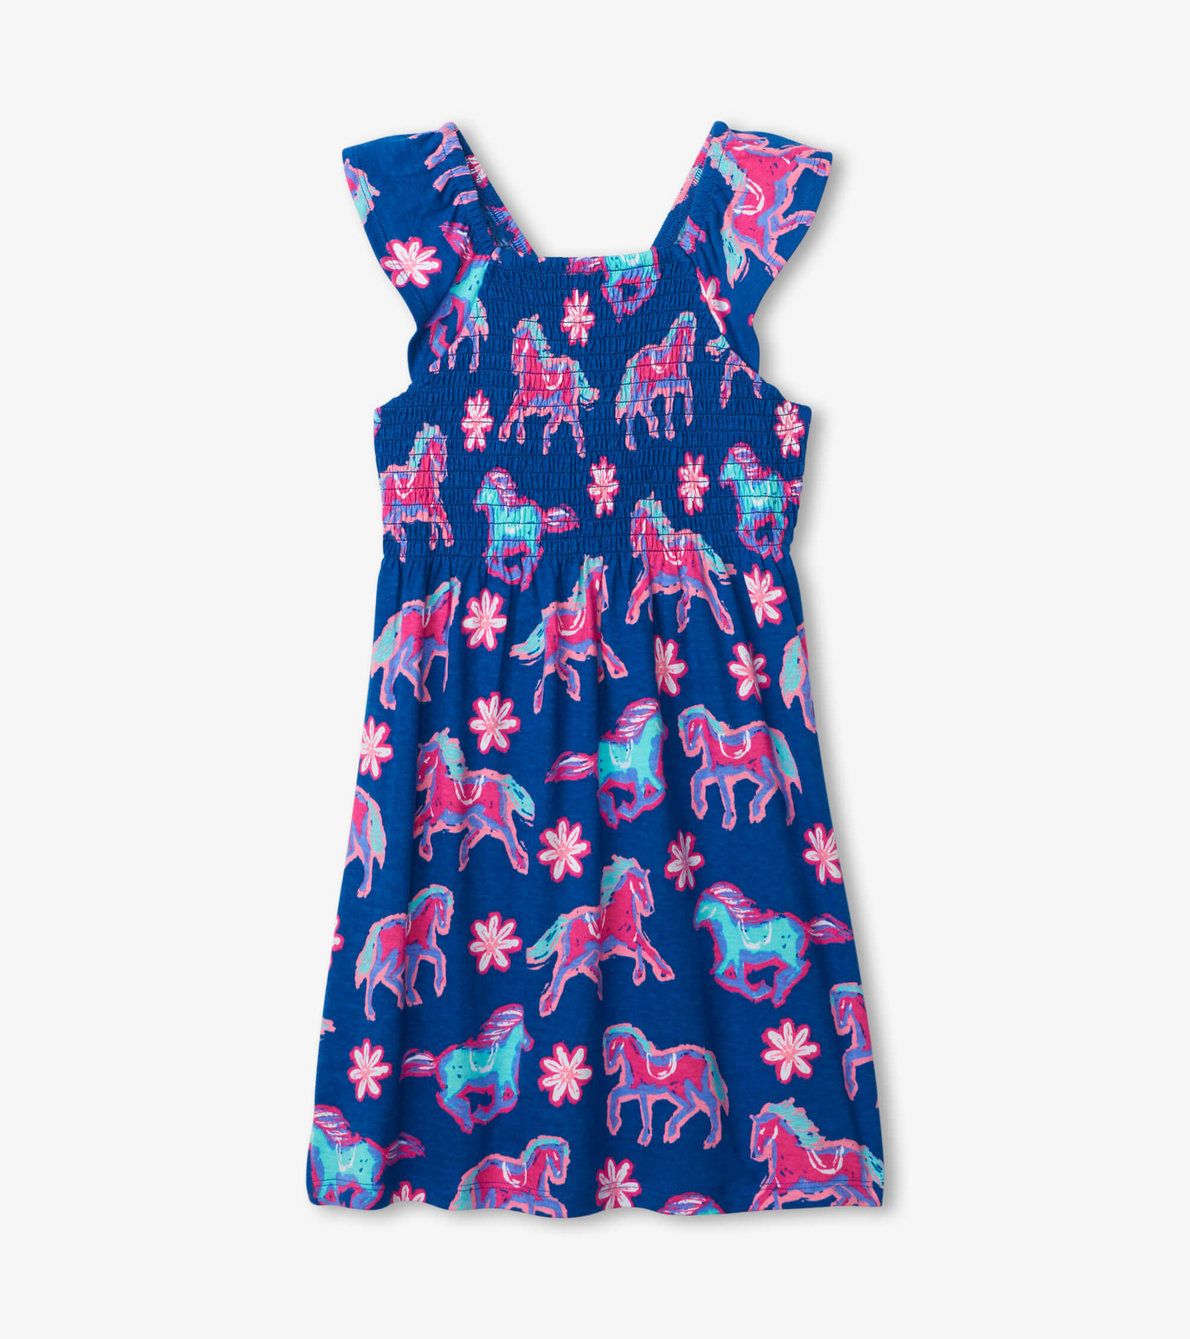 View larger image of Electric Horses Smocked Dress